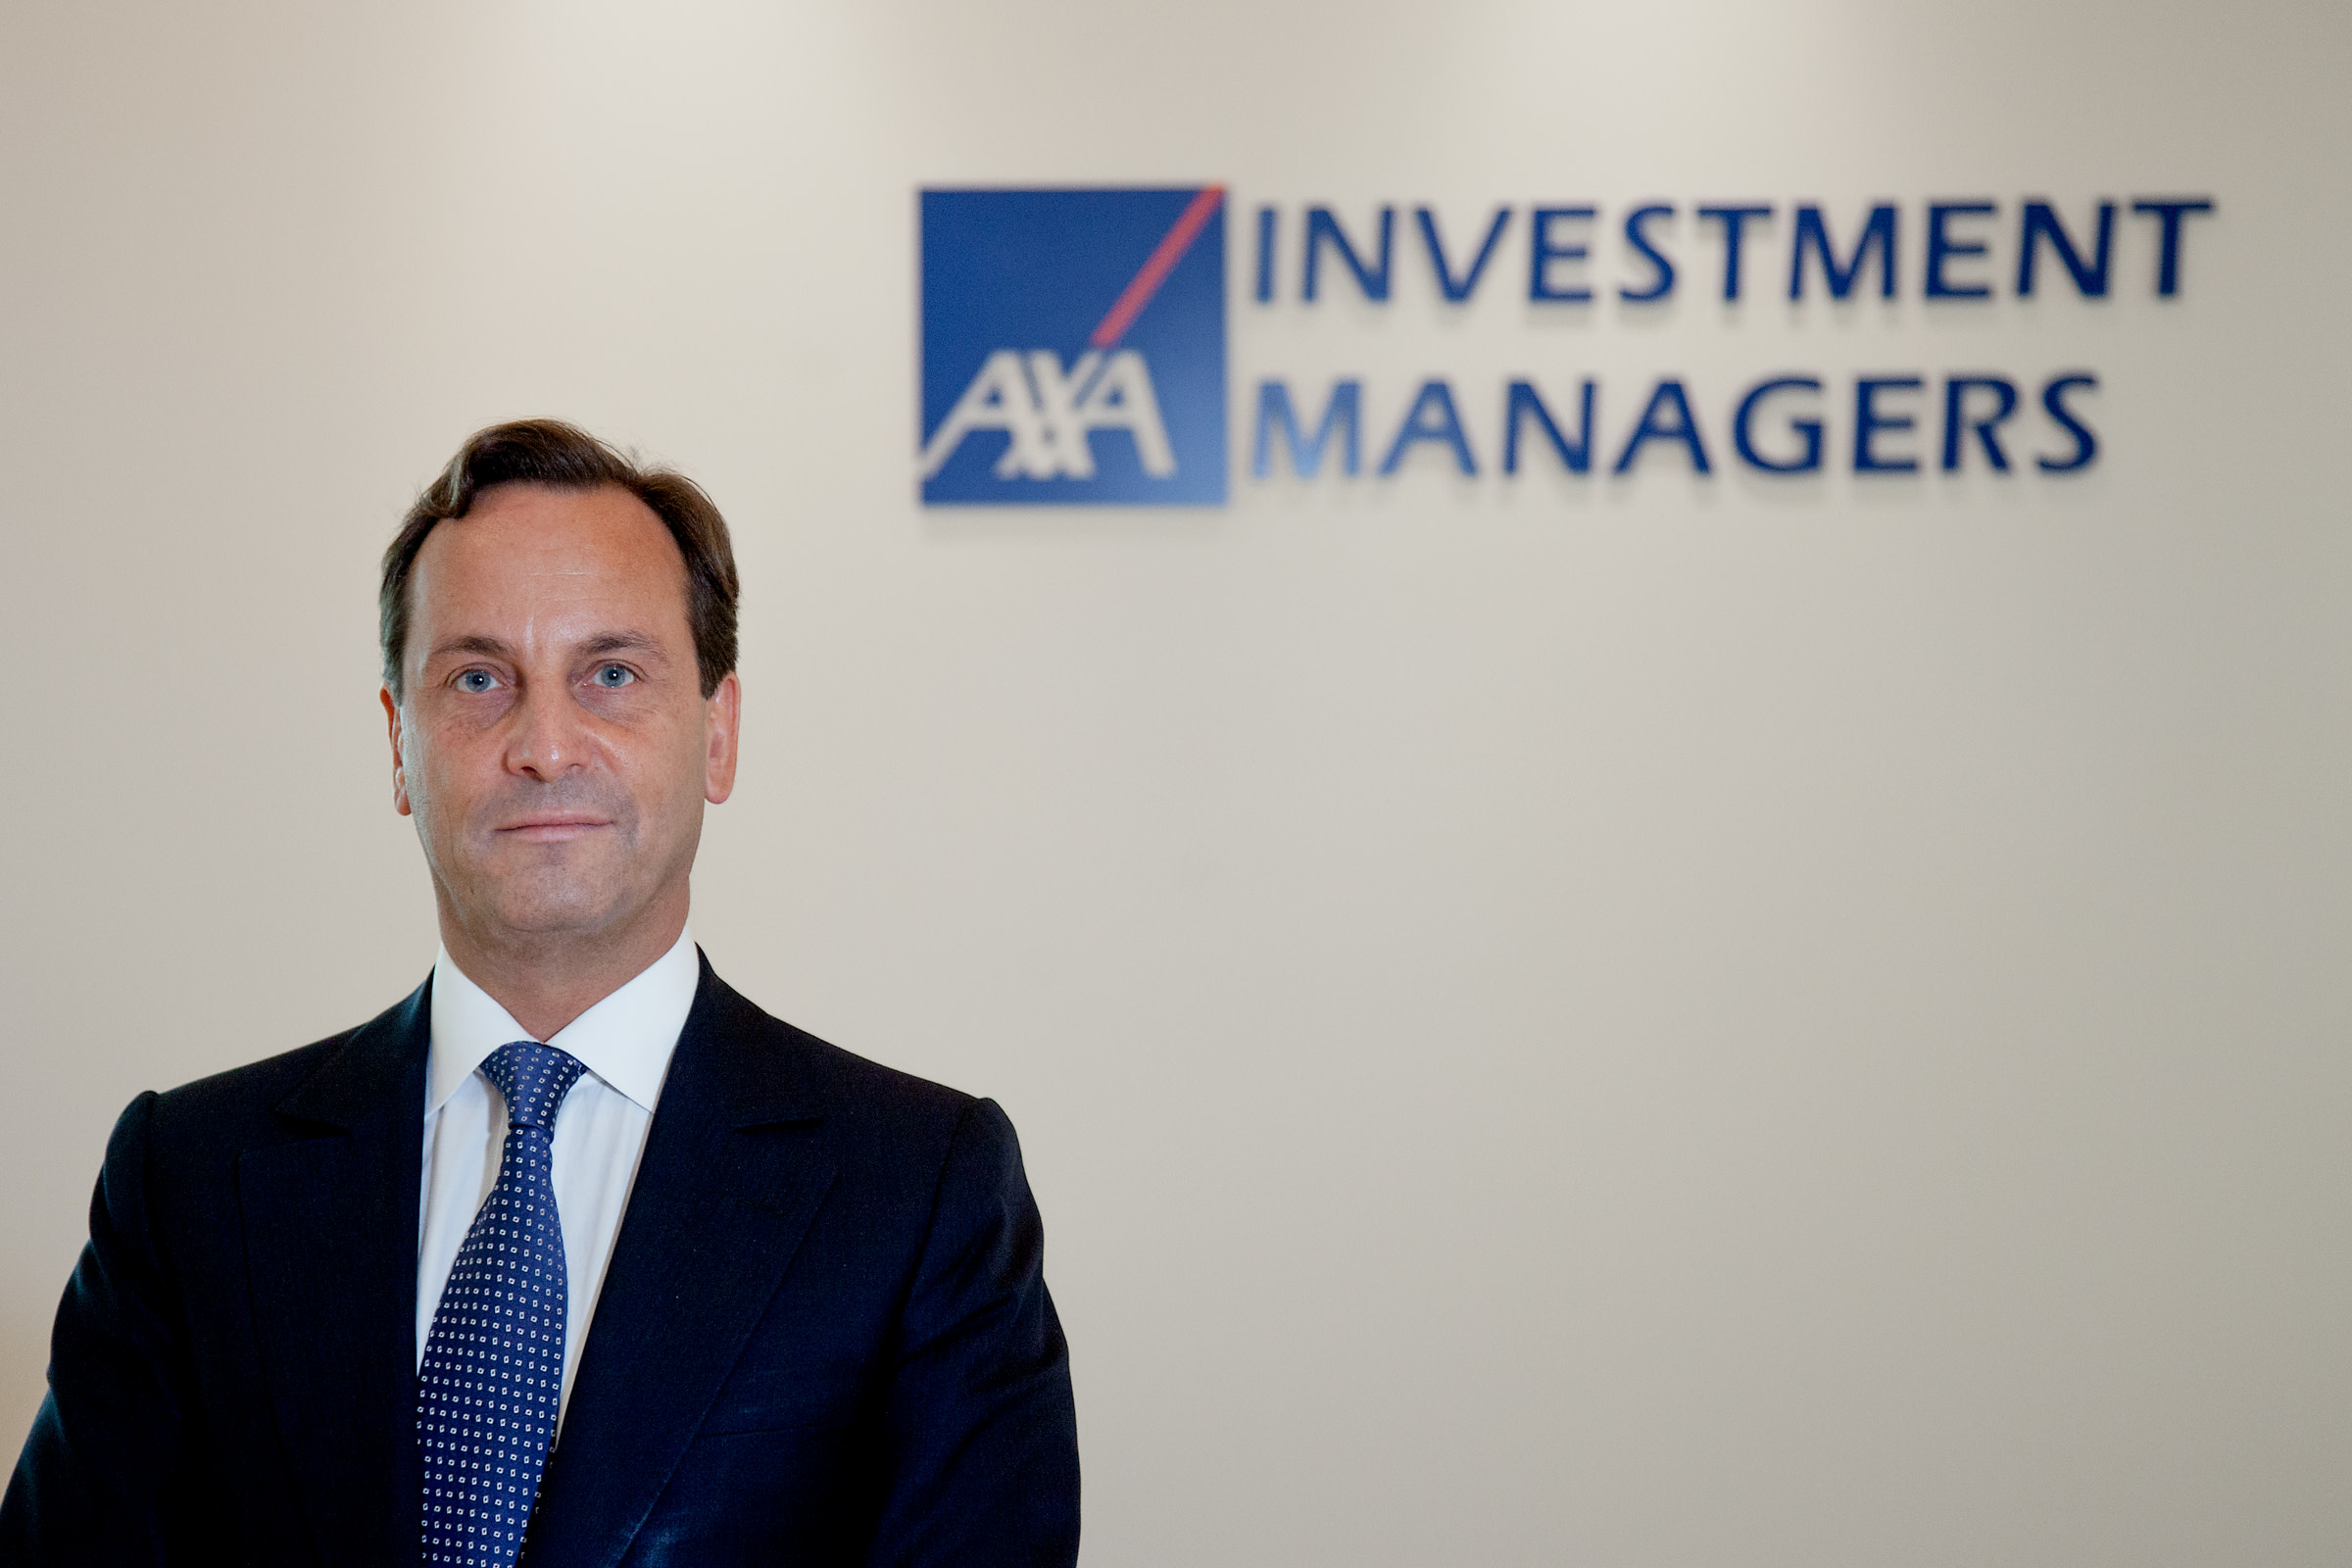 Axa pushes firms to act on sustainability issues